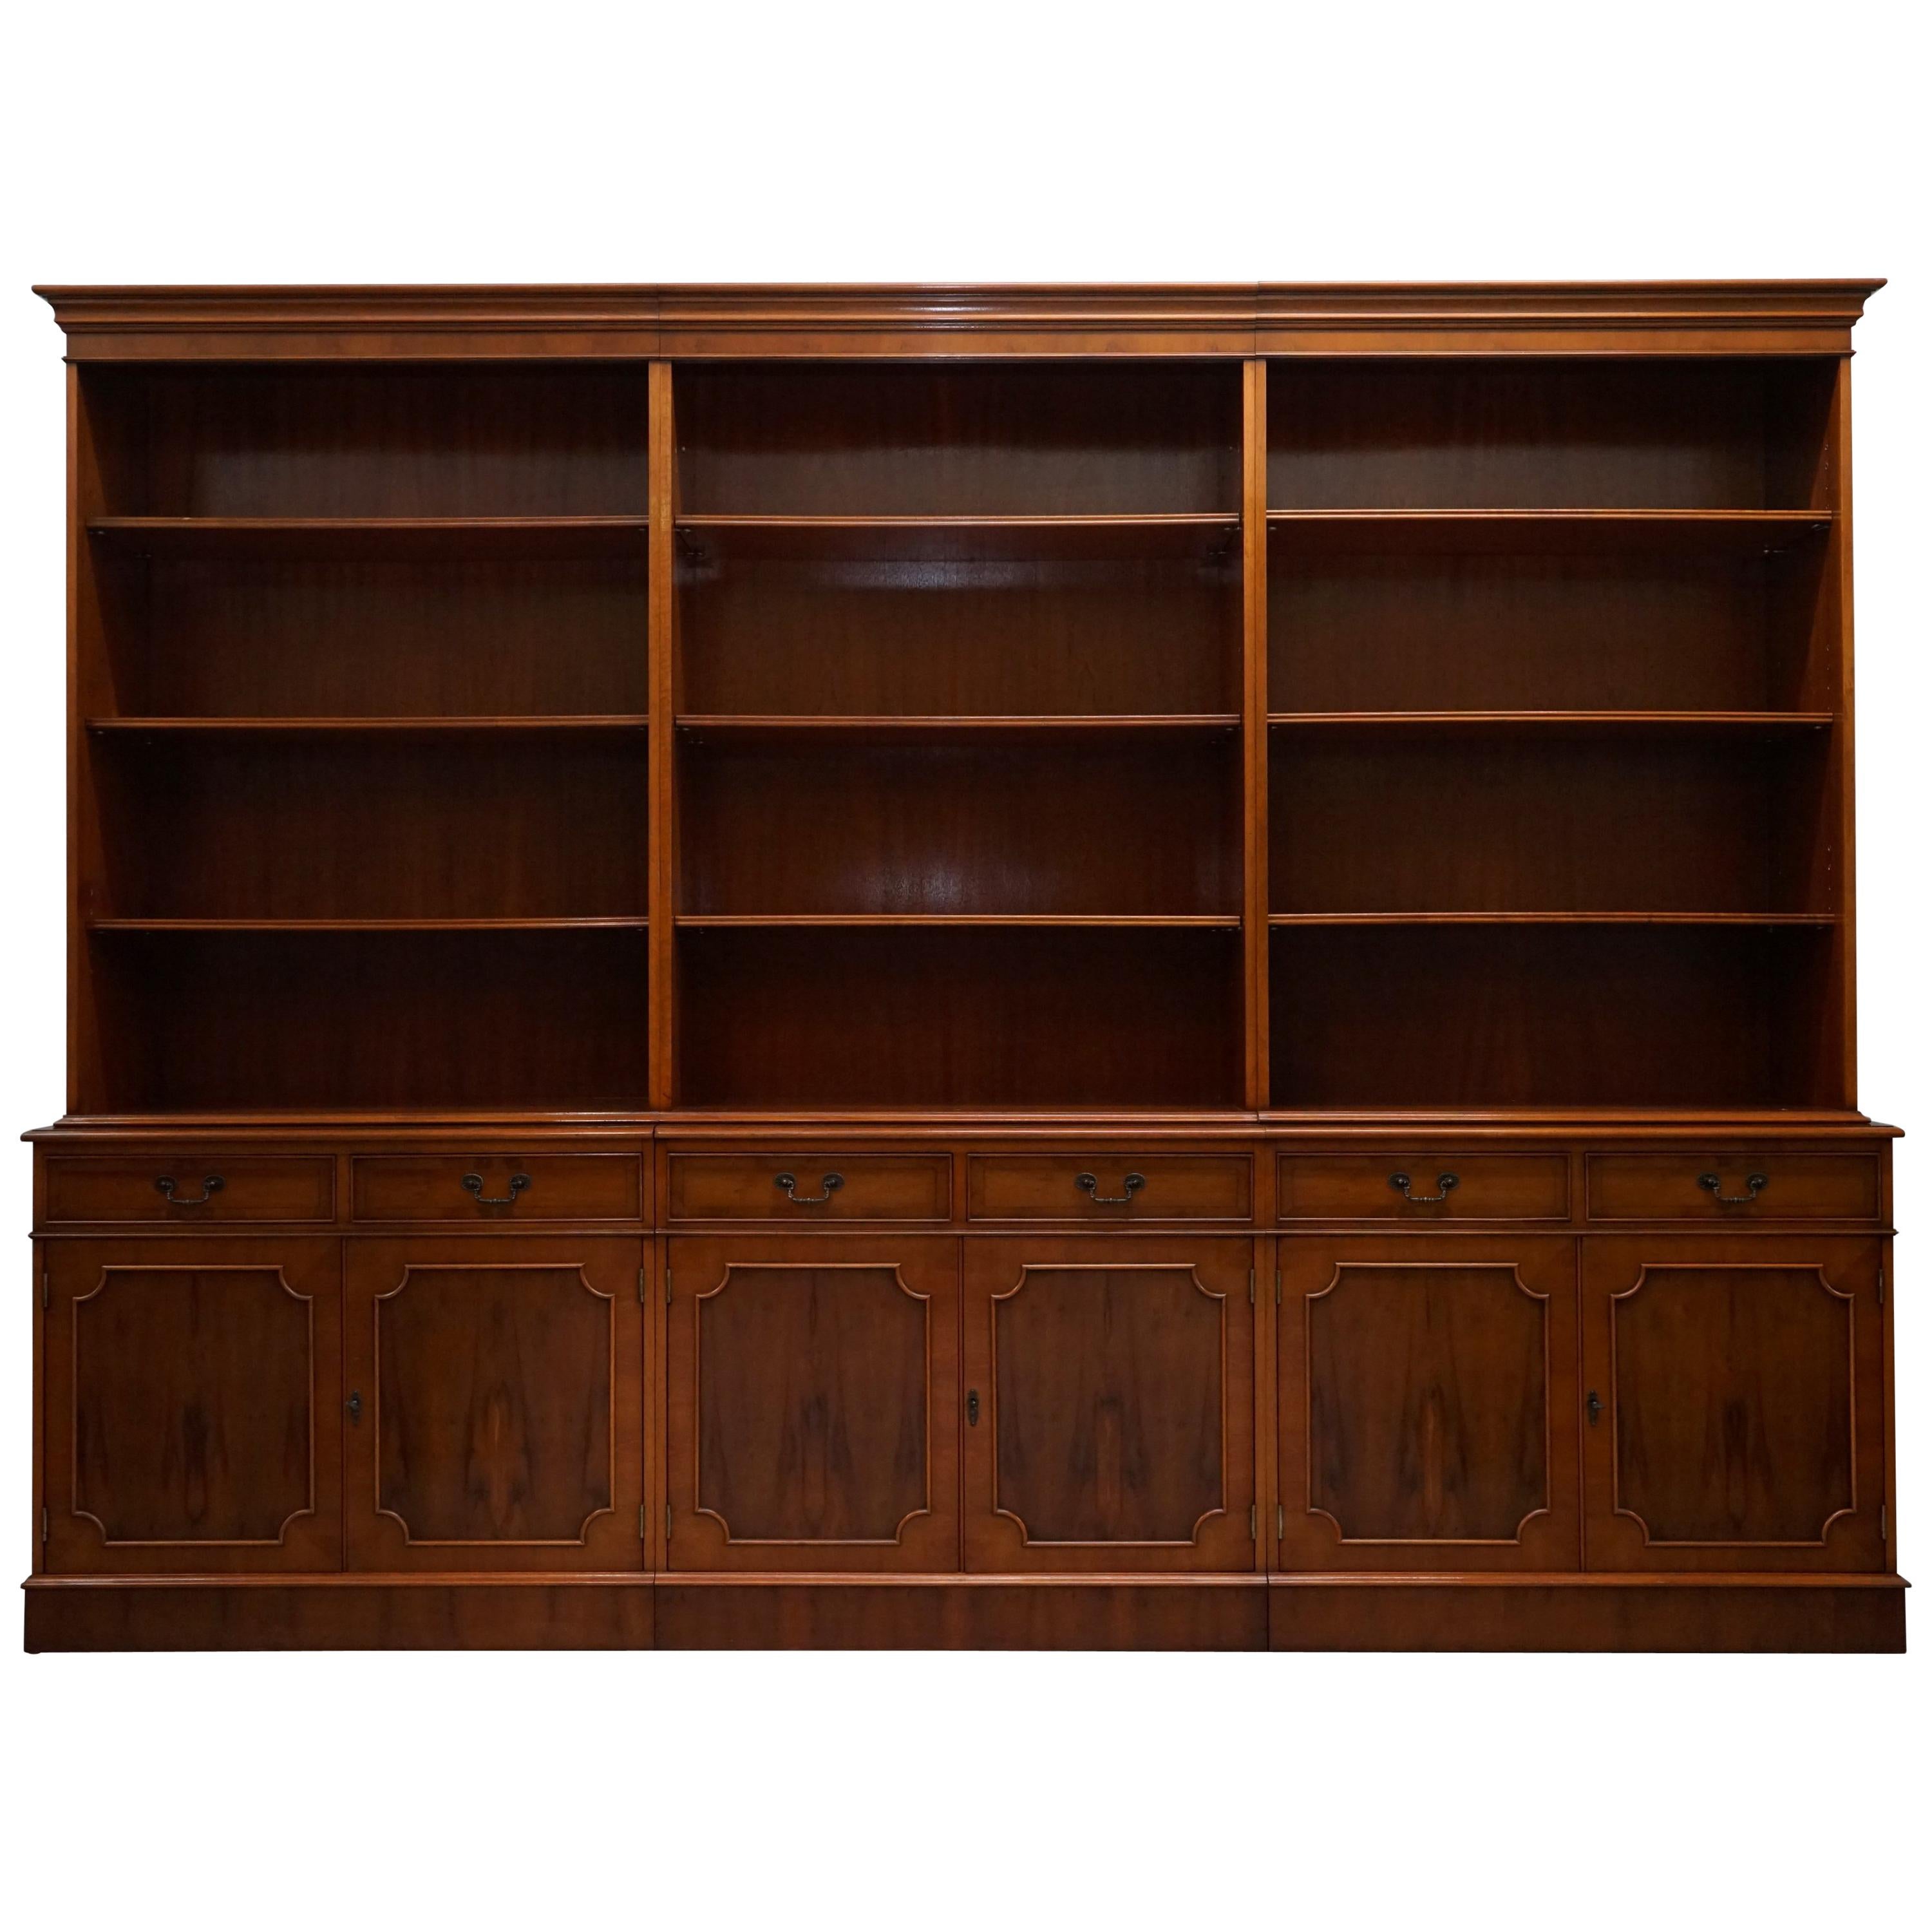 Stunning FLAMED YEW WOOD BRADLEY ENGLAND TRIPLE BANK LiBRARY BOOKCASE CUPBOARD